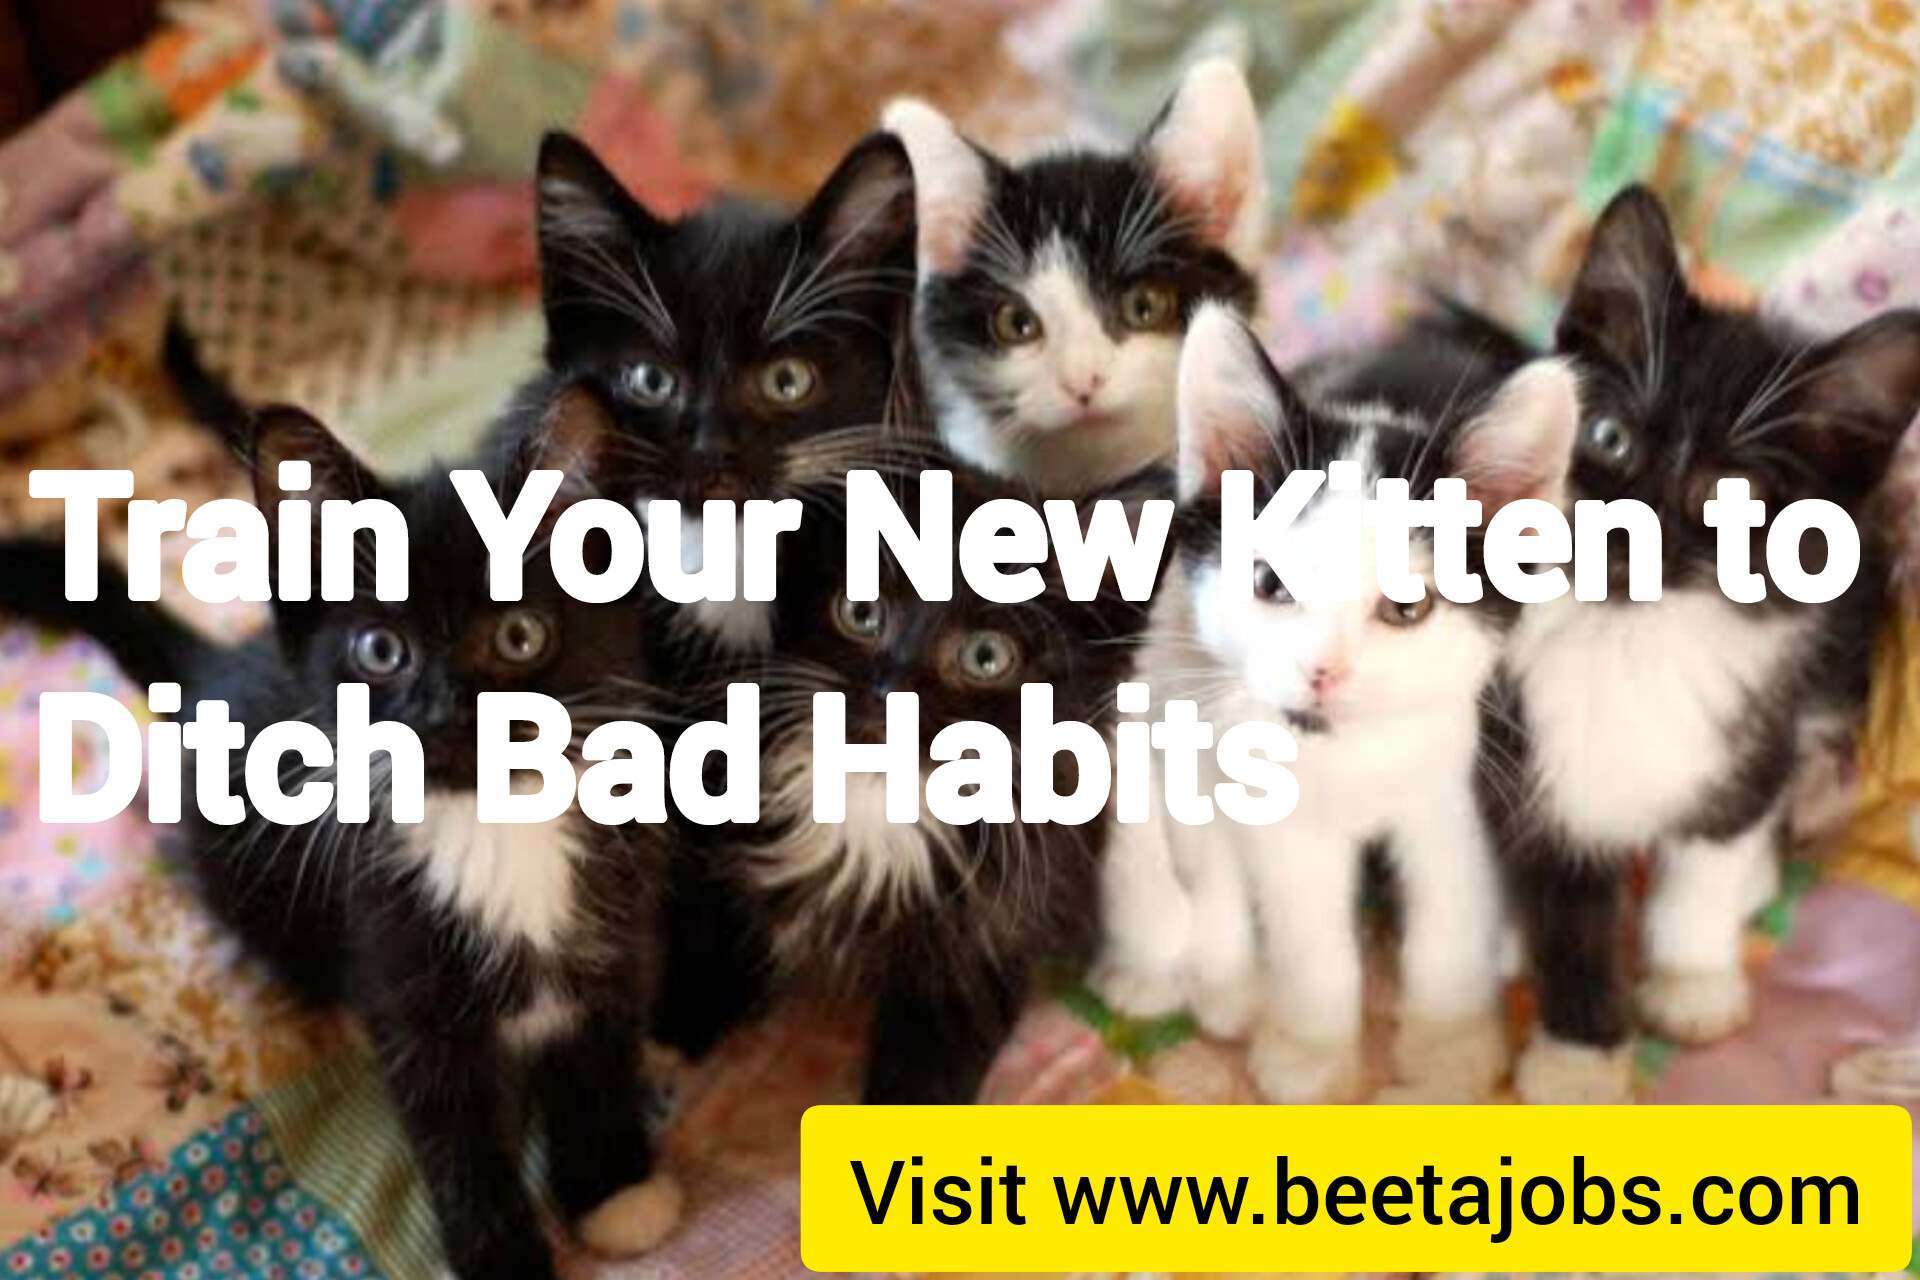 Train Your New Kitten to Ditch Bad Habits